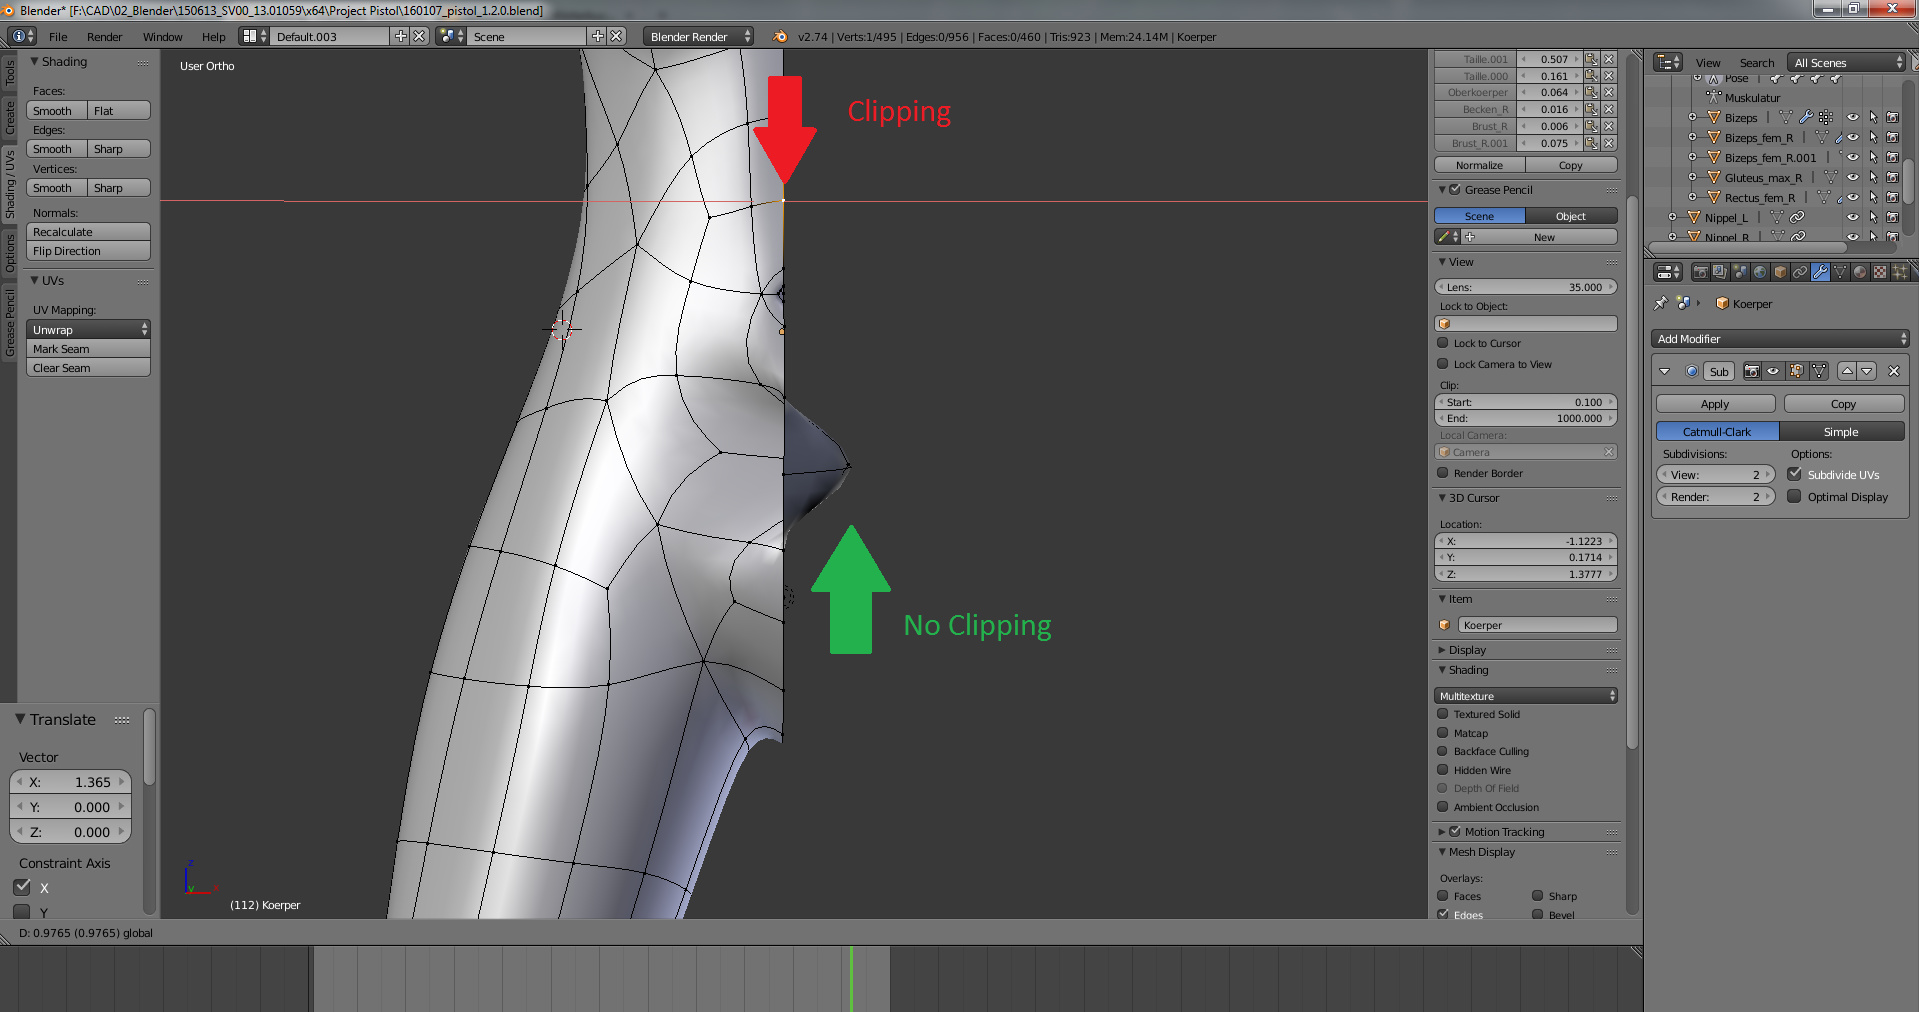 Clipping in Edit mode, but mirror. Blender slow. Modeling - Artists Community